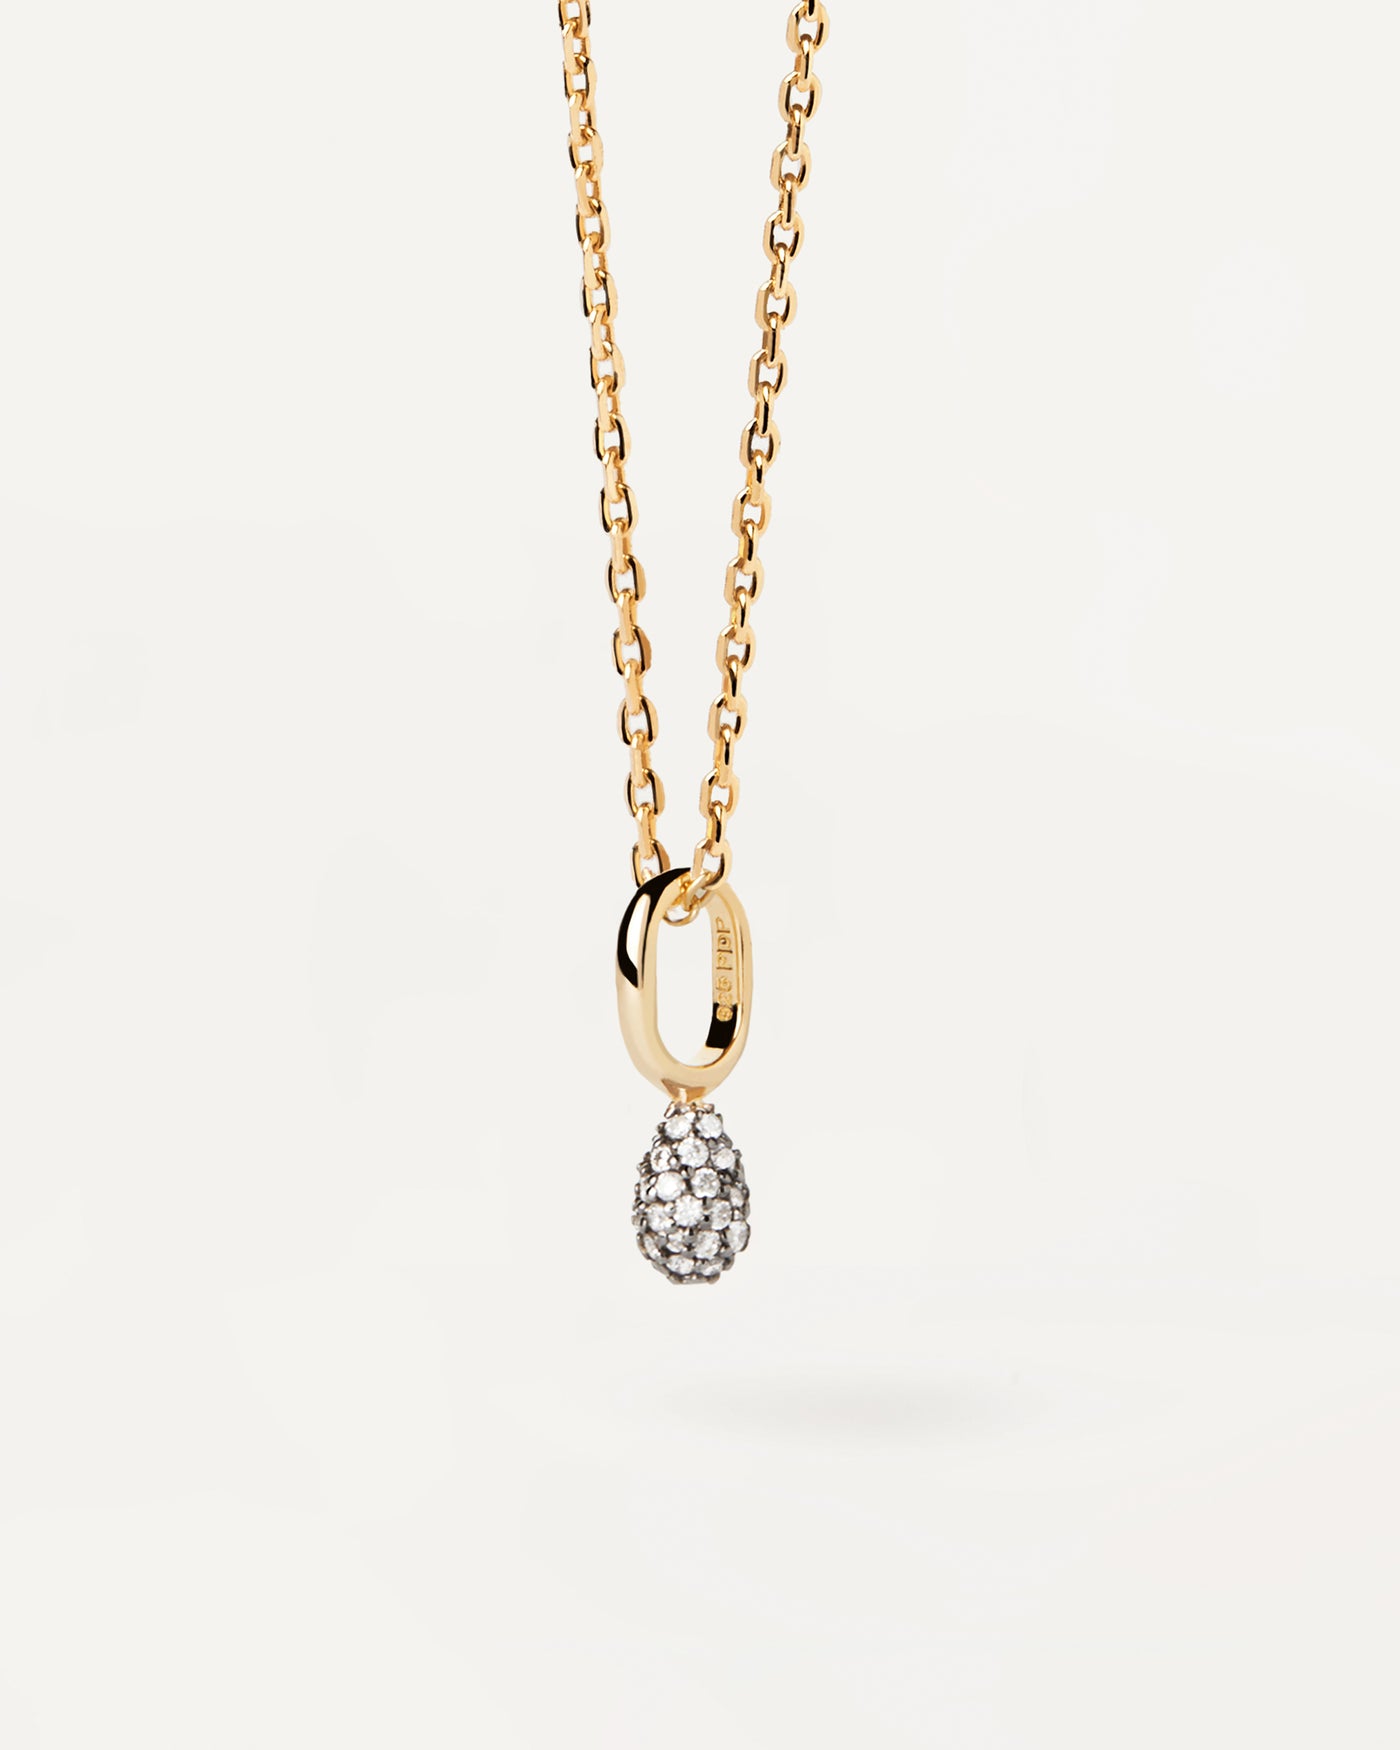 2023 Selection | Pavé Lava Necklace. Gold-plated necklace with pavé zirconia drop pendant. Get the latest arrival from PDPAOLA. Place your order safely and get this Best Seller. Free Shipping.